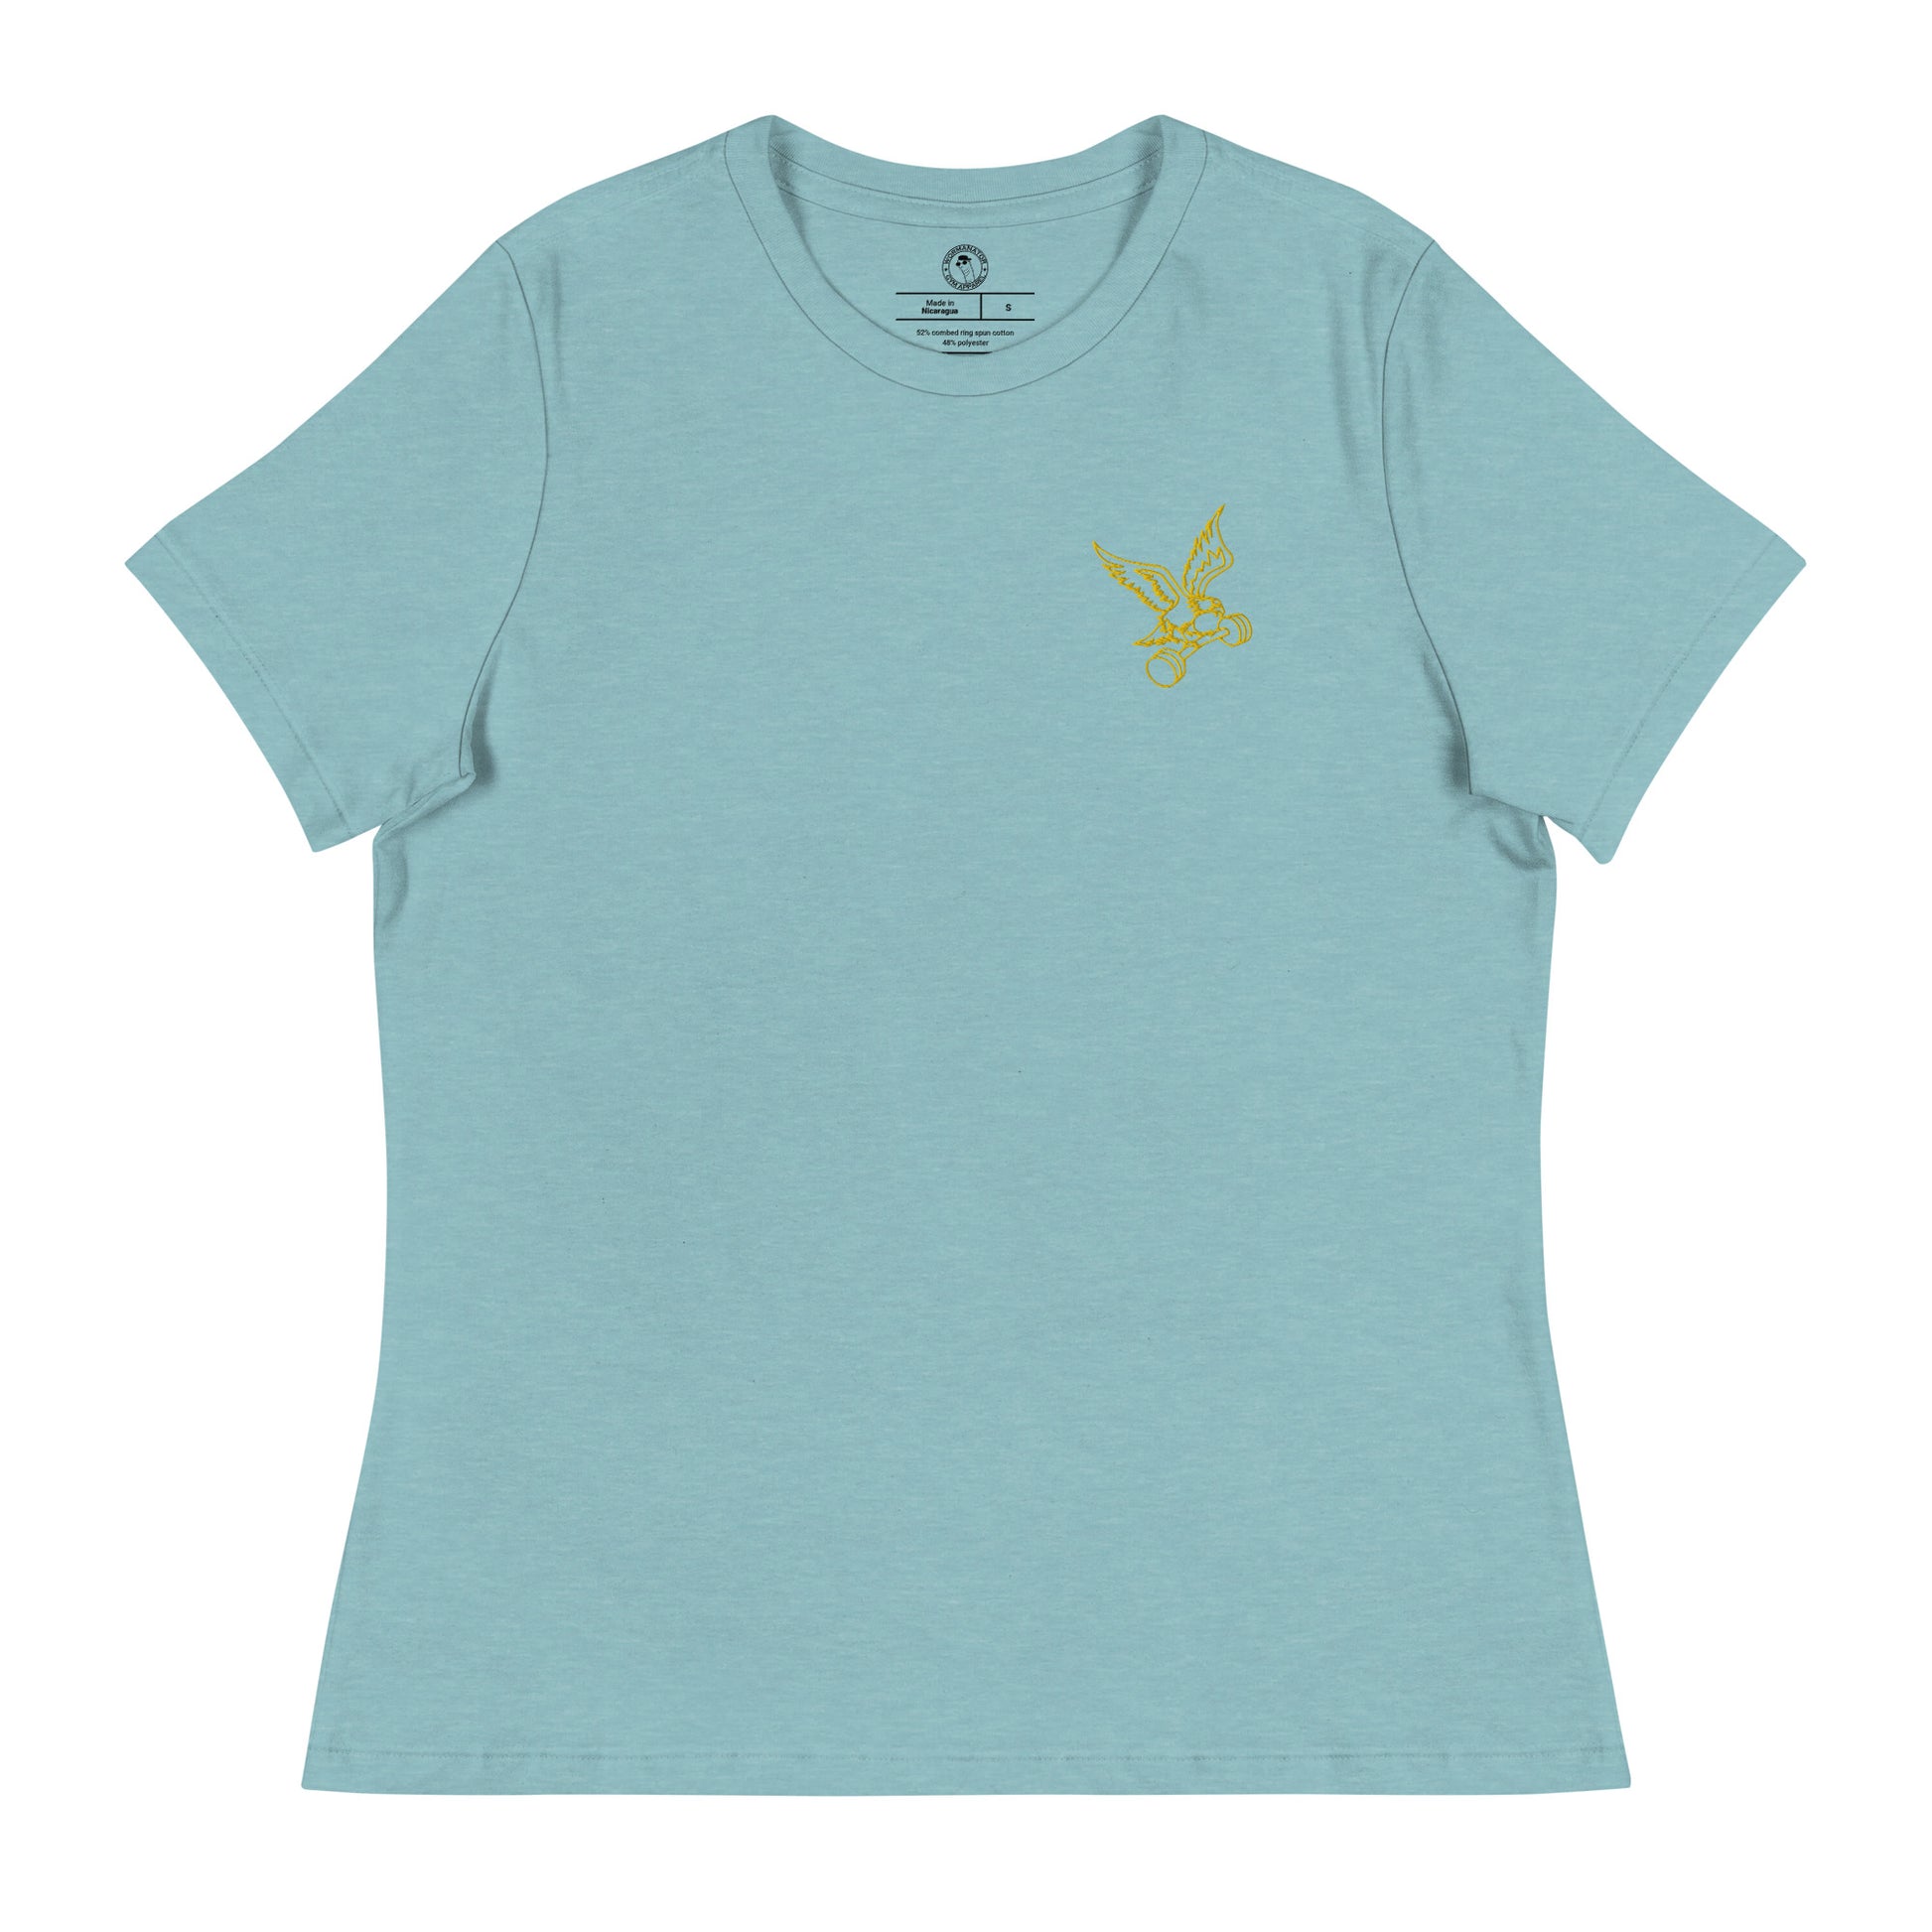 Women's Embroidered Barbell Eagle Shirt in Heather Blue Lagoon